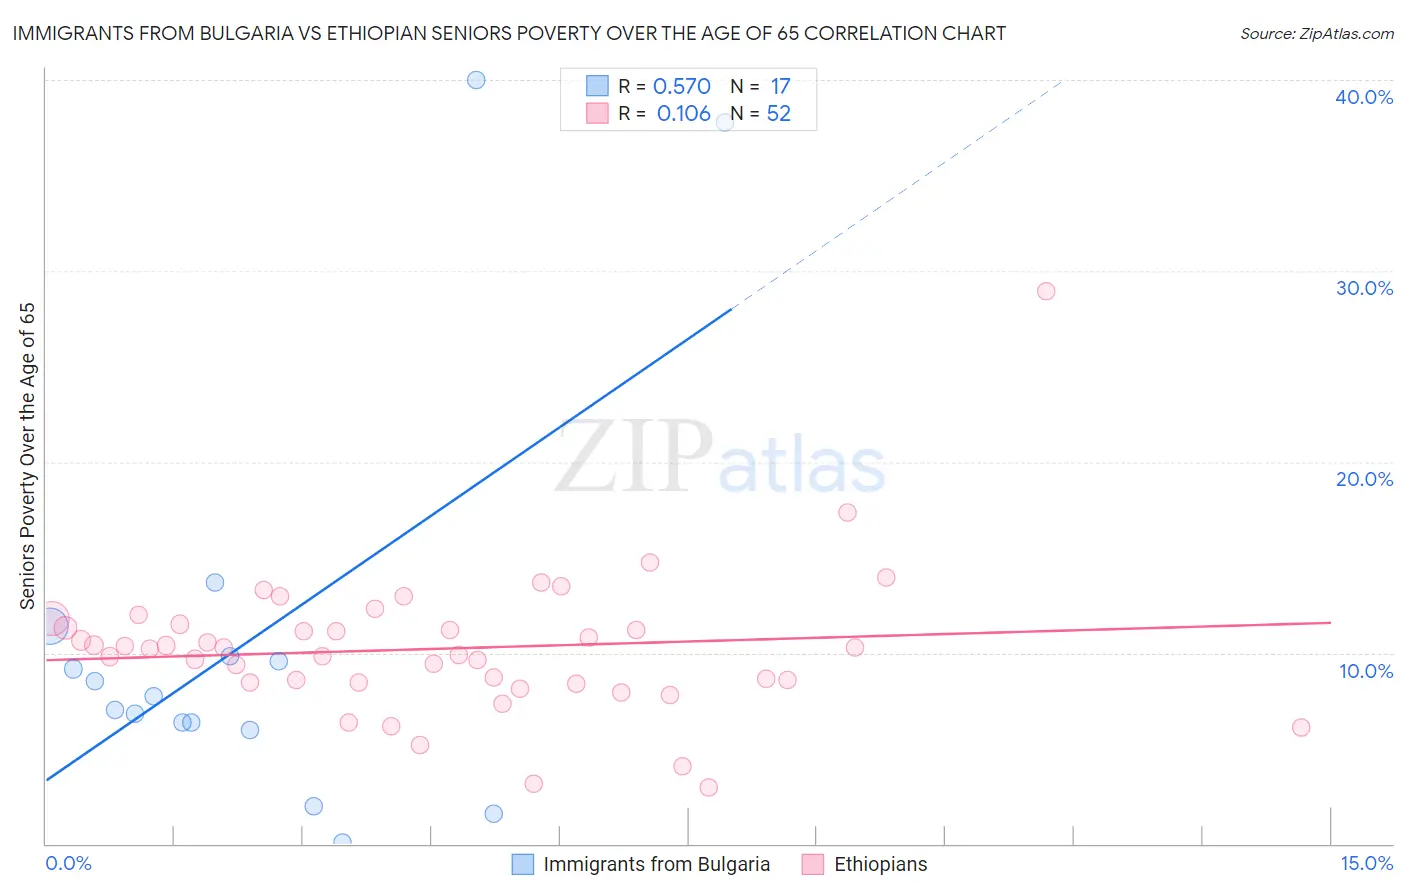 Immigrants from Bulgaria vs Ethiopian Seniors Poverty Over the Age of 65